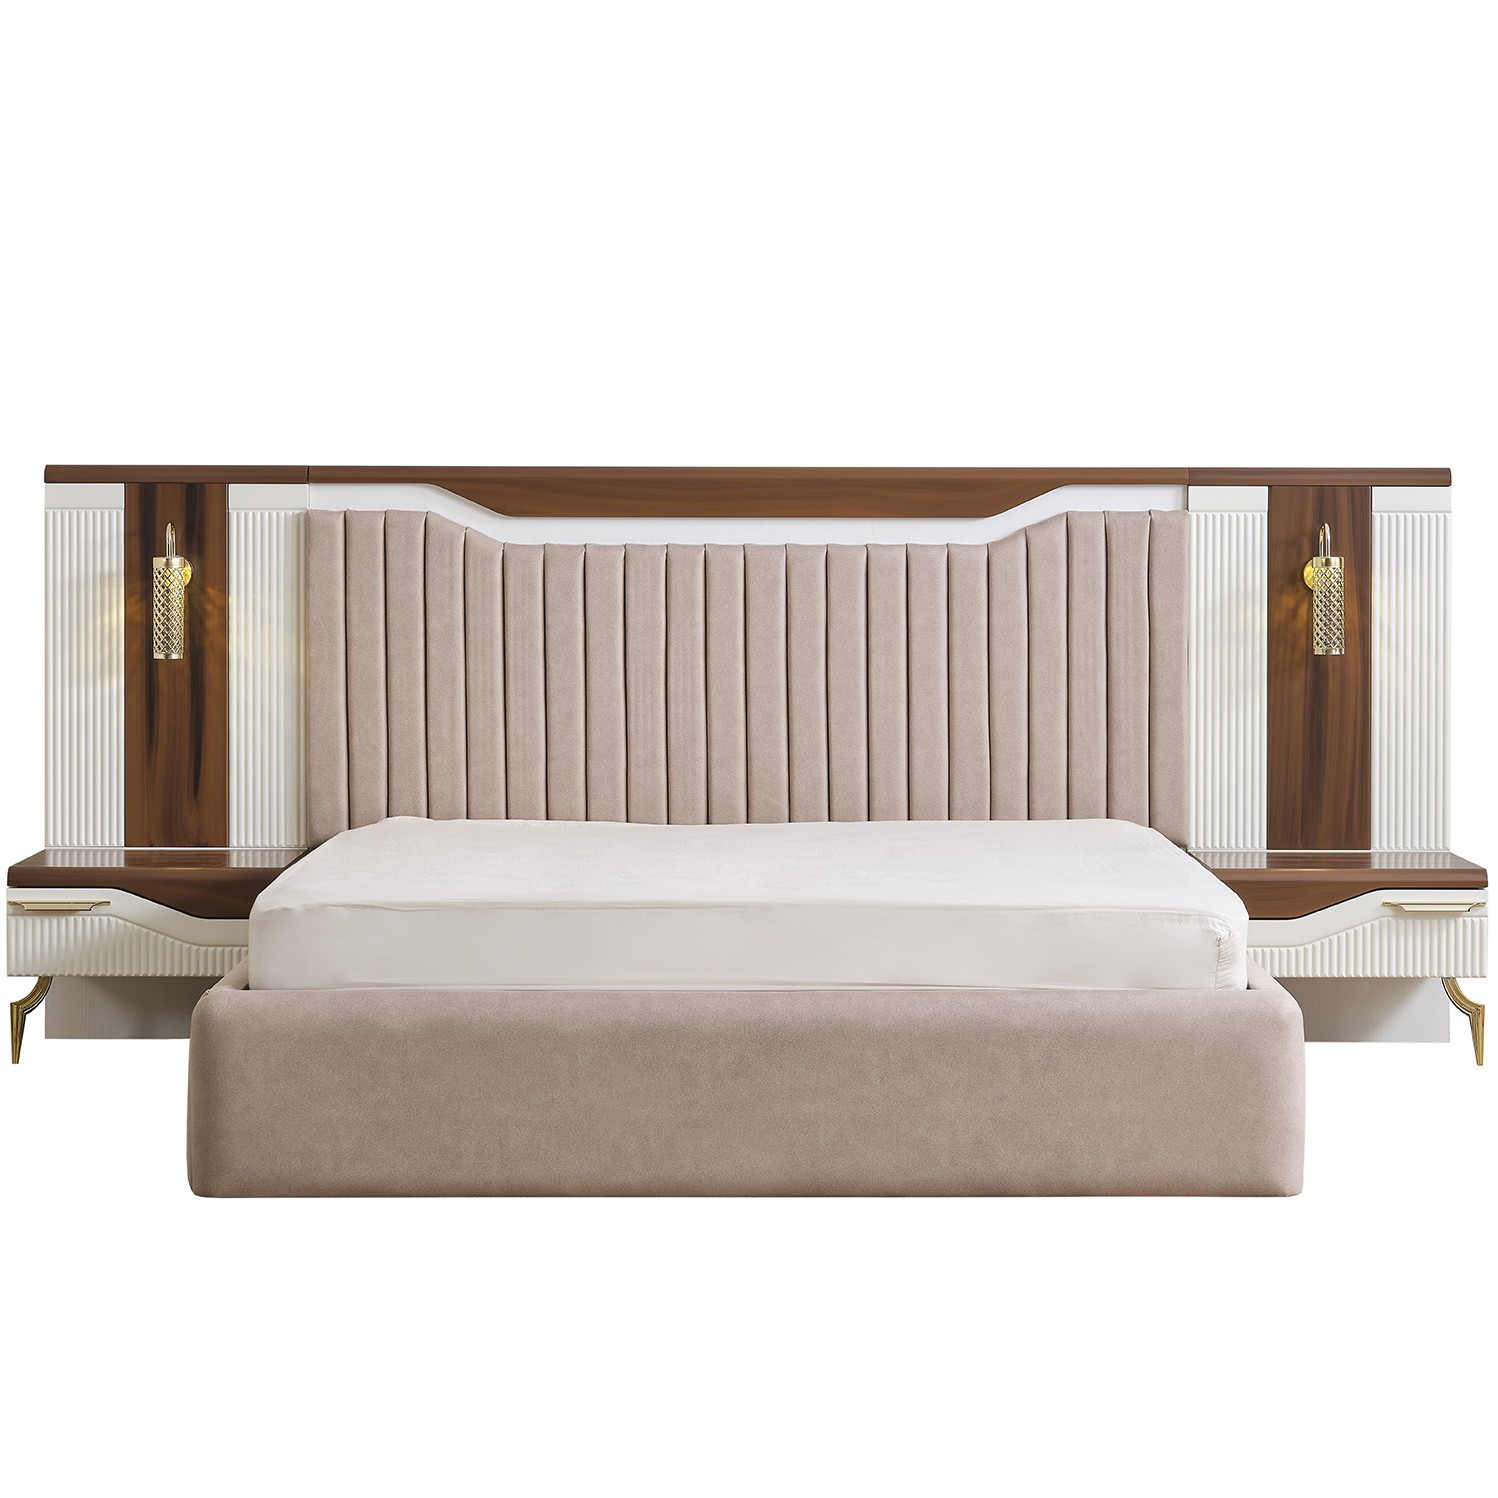 Style Hermes Vol1 Bed Without Storage 160x200 cm